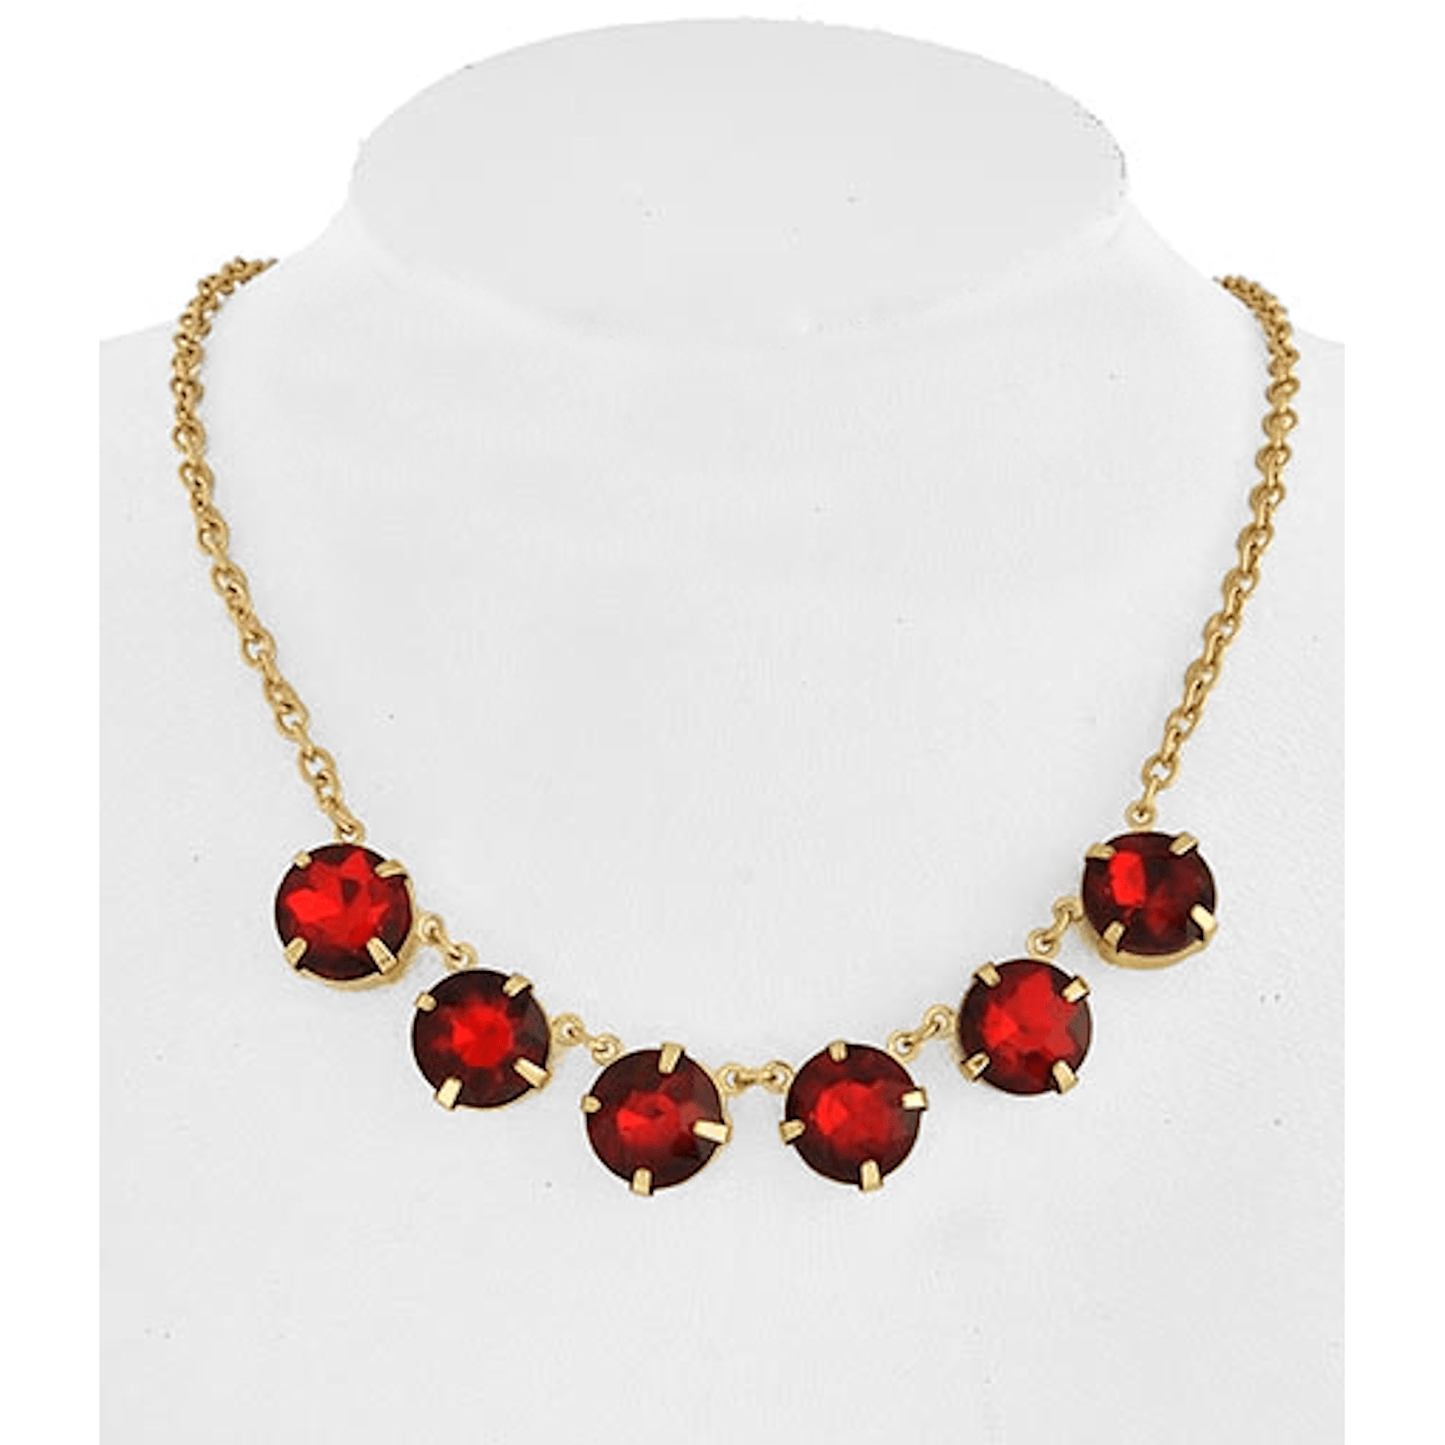 Gold and Garnet Color Rhinestone Necklace